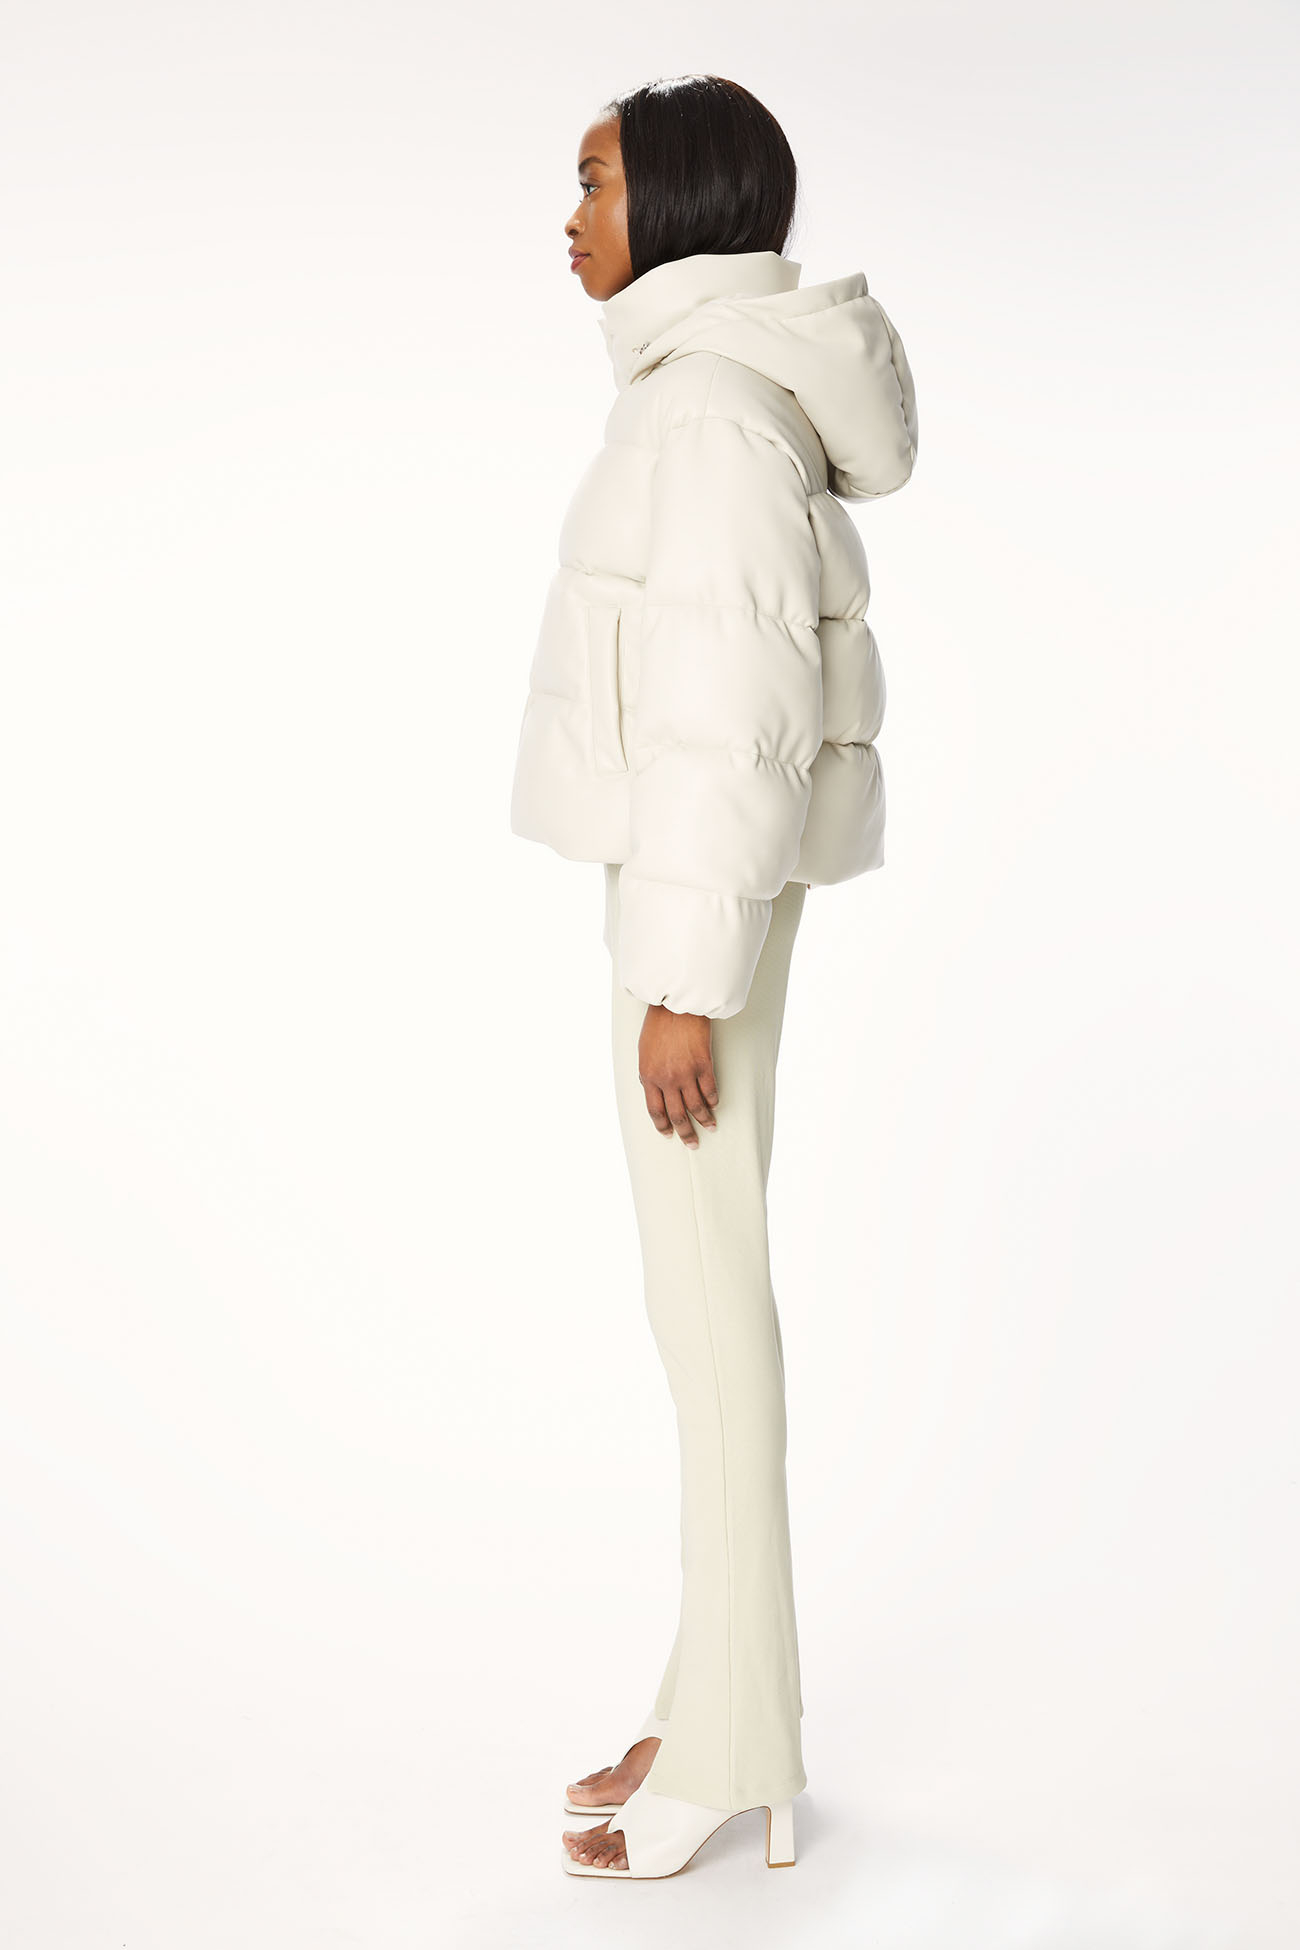 JACKET 9200 MADE IN ECO LEATHER - NATURAL WHITE - OOF WEAR